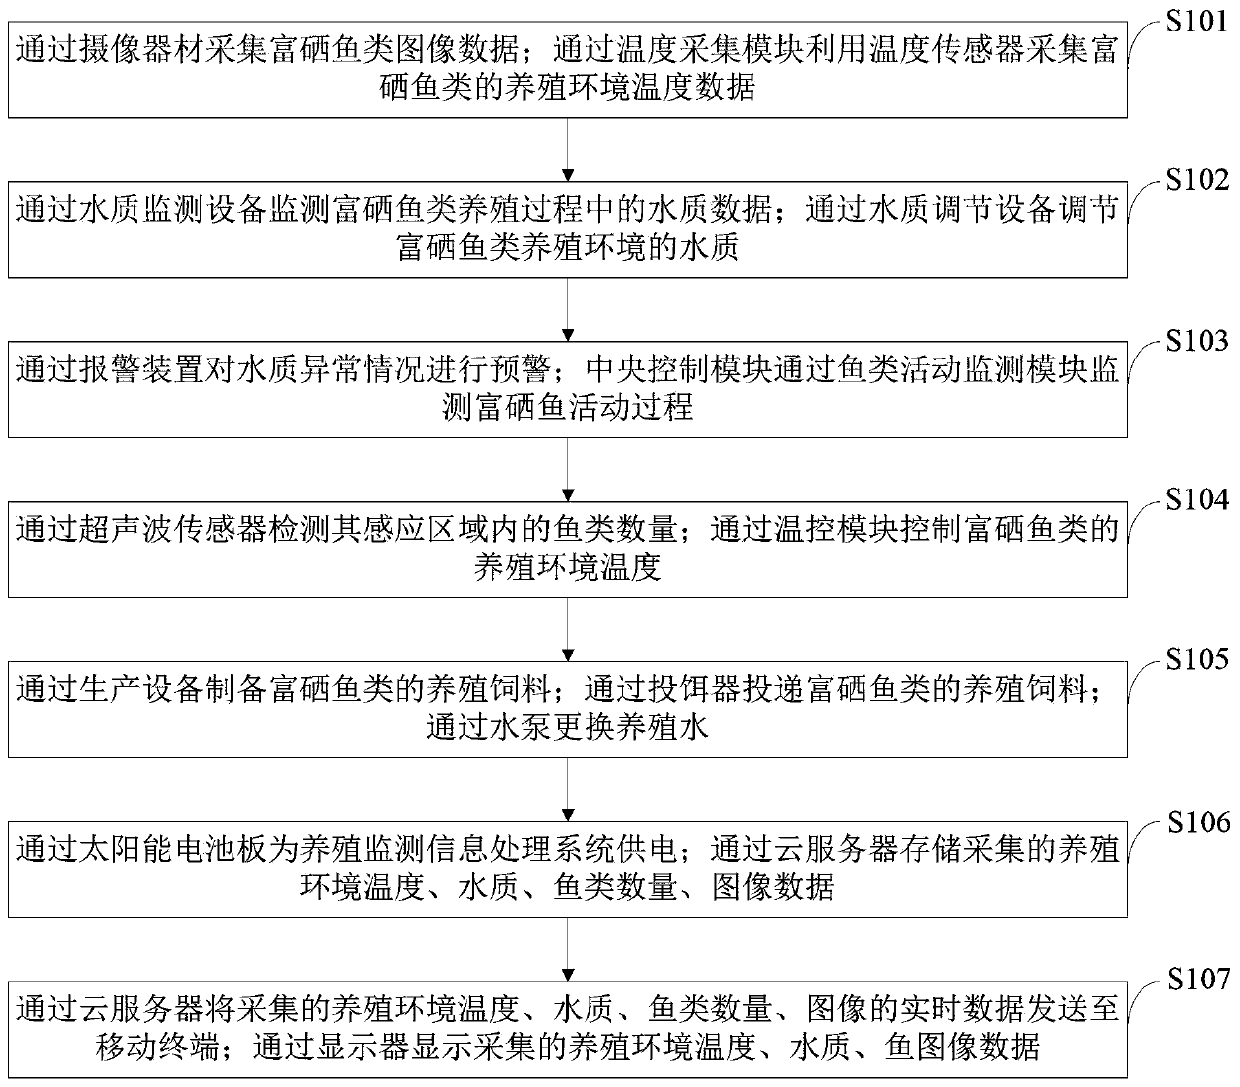 Selenium-rich fish culture monitoring information processing system and method